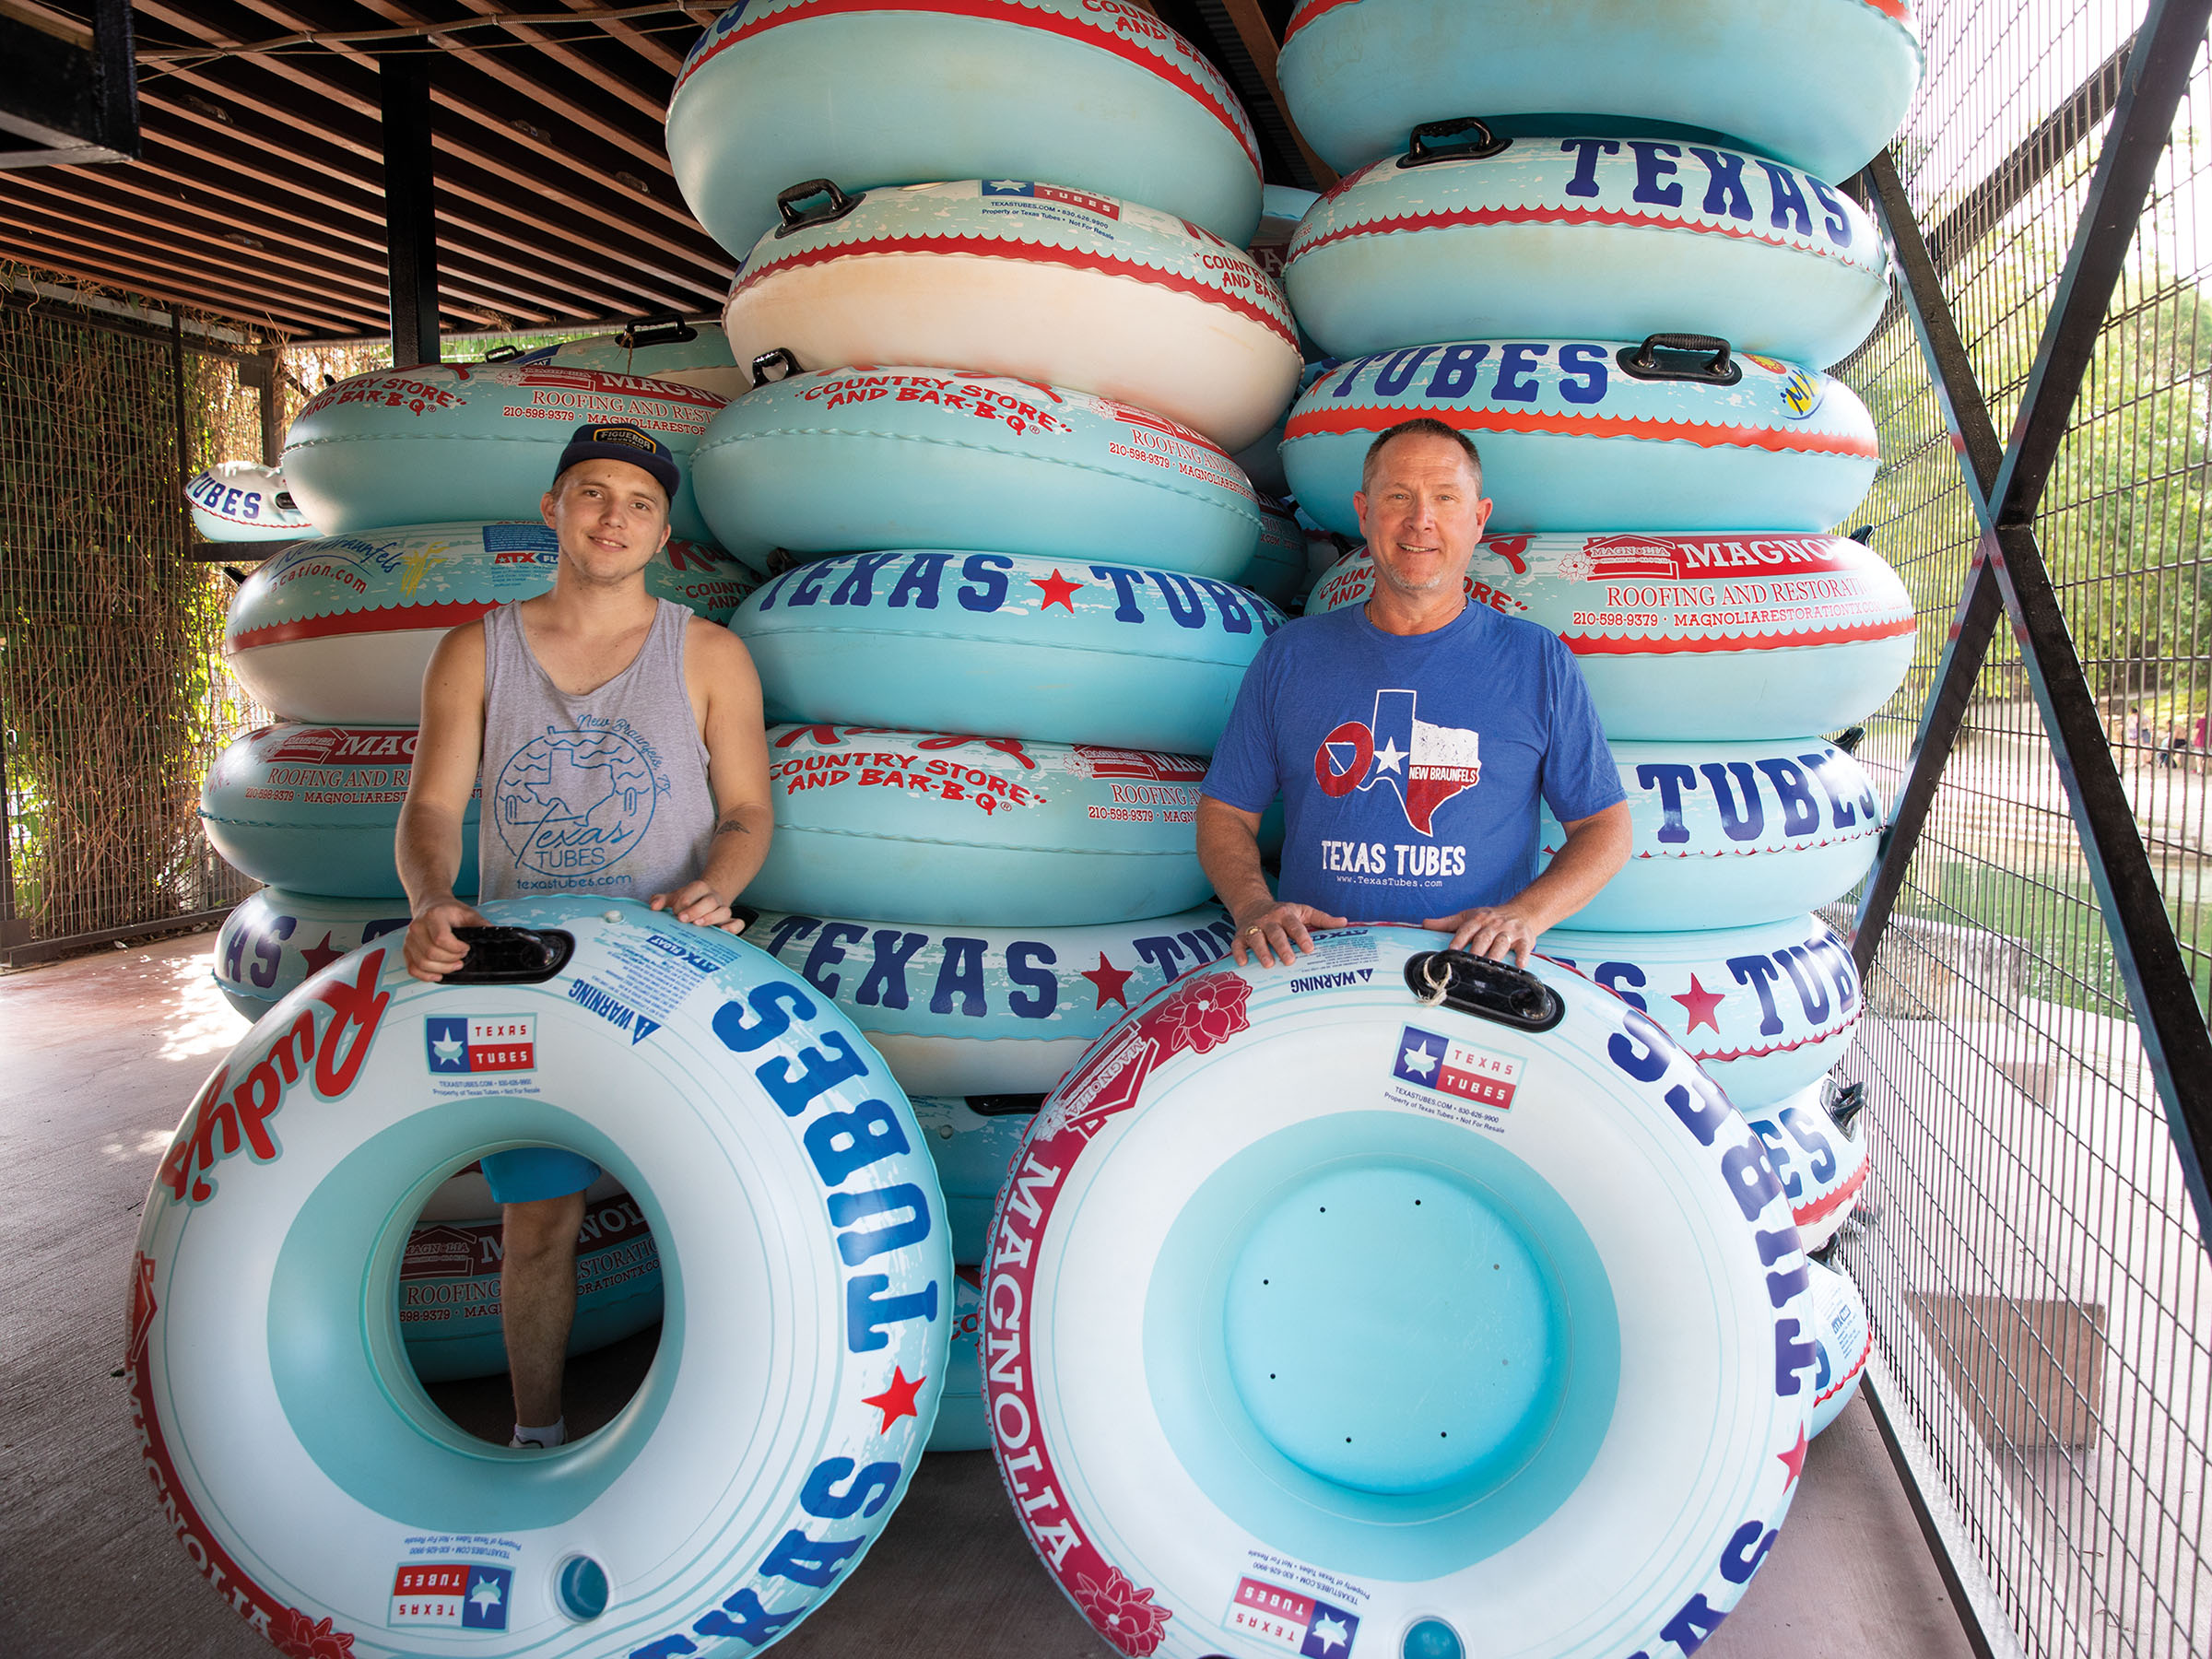 Two people stand holding tubes in front of a large stack of turquoise, blue and white river tubes